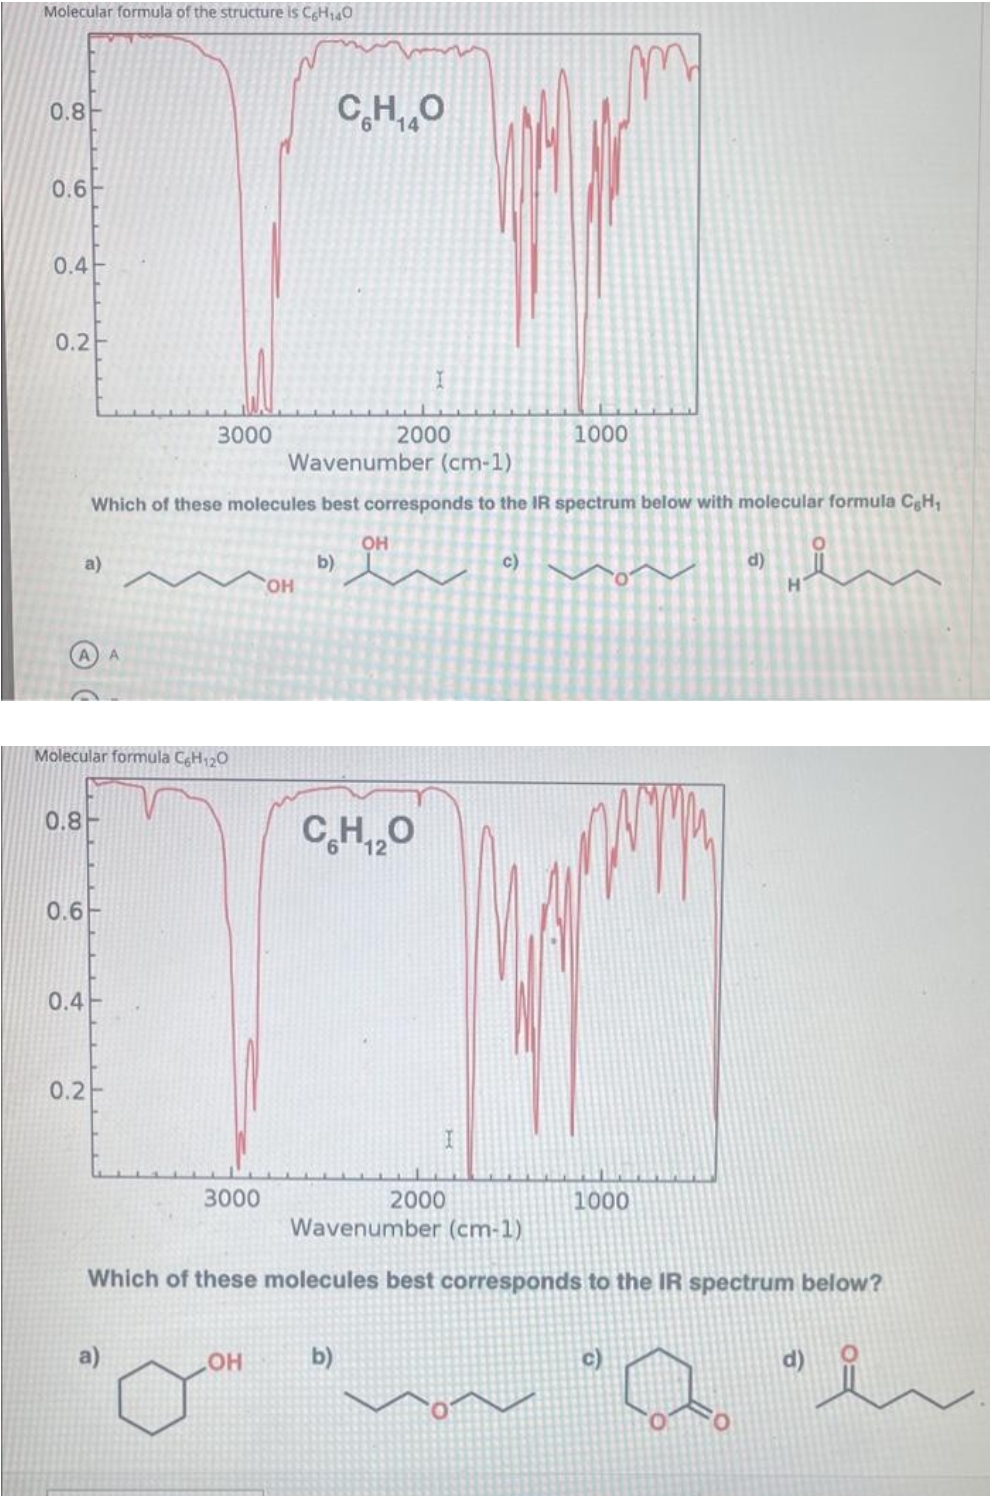 Molecular formula of the structure is C6H140
0.8
0.6
0.4
0.2
0.8
0.6
0.4
a)
Molecular formula C6H12O
0.2
3000
A
Wavenumber (cm-1)
Which of these molecules best corresponds to the IR spectrum below with molecular formula CgH₁
3000
OH
OH
b)
CHO
OH
b)
I
2000
CH2O
12
2000
1000
c)
1000
d)
Wavenumber (cm-1)
Which of these molecules best corresponds to the IR spectrum below?
~~ Q
H
1=
d)